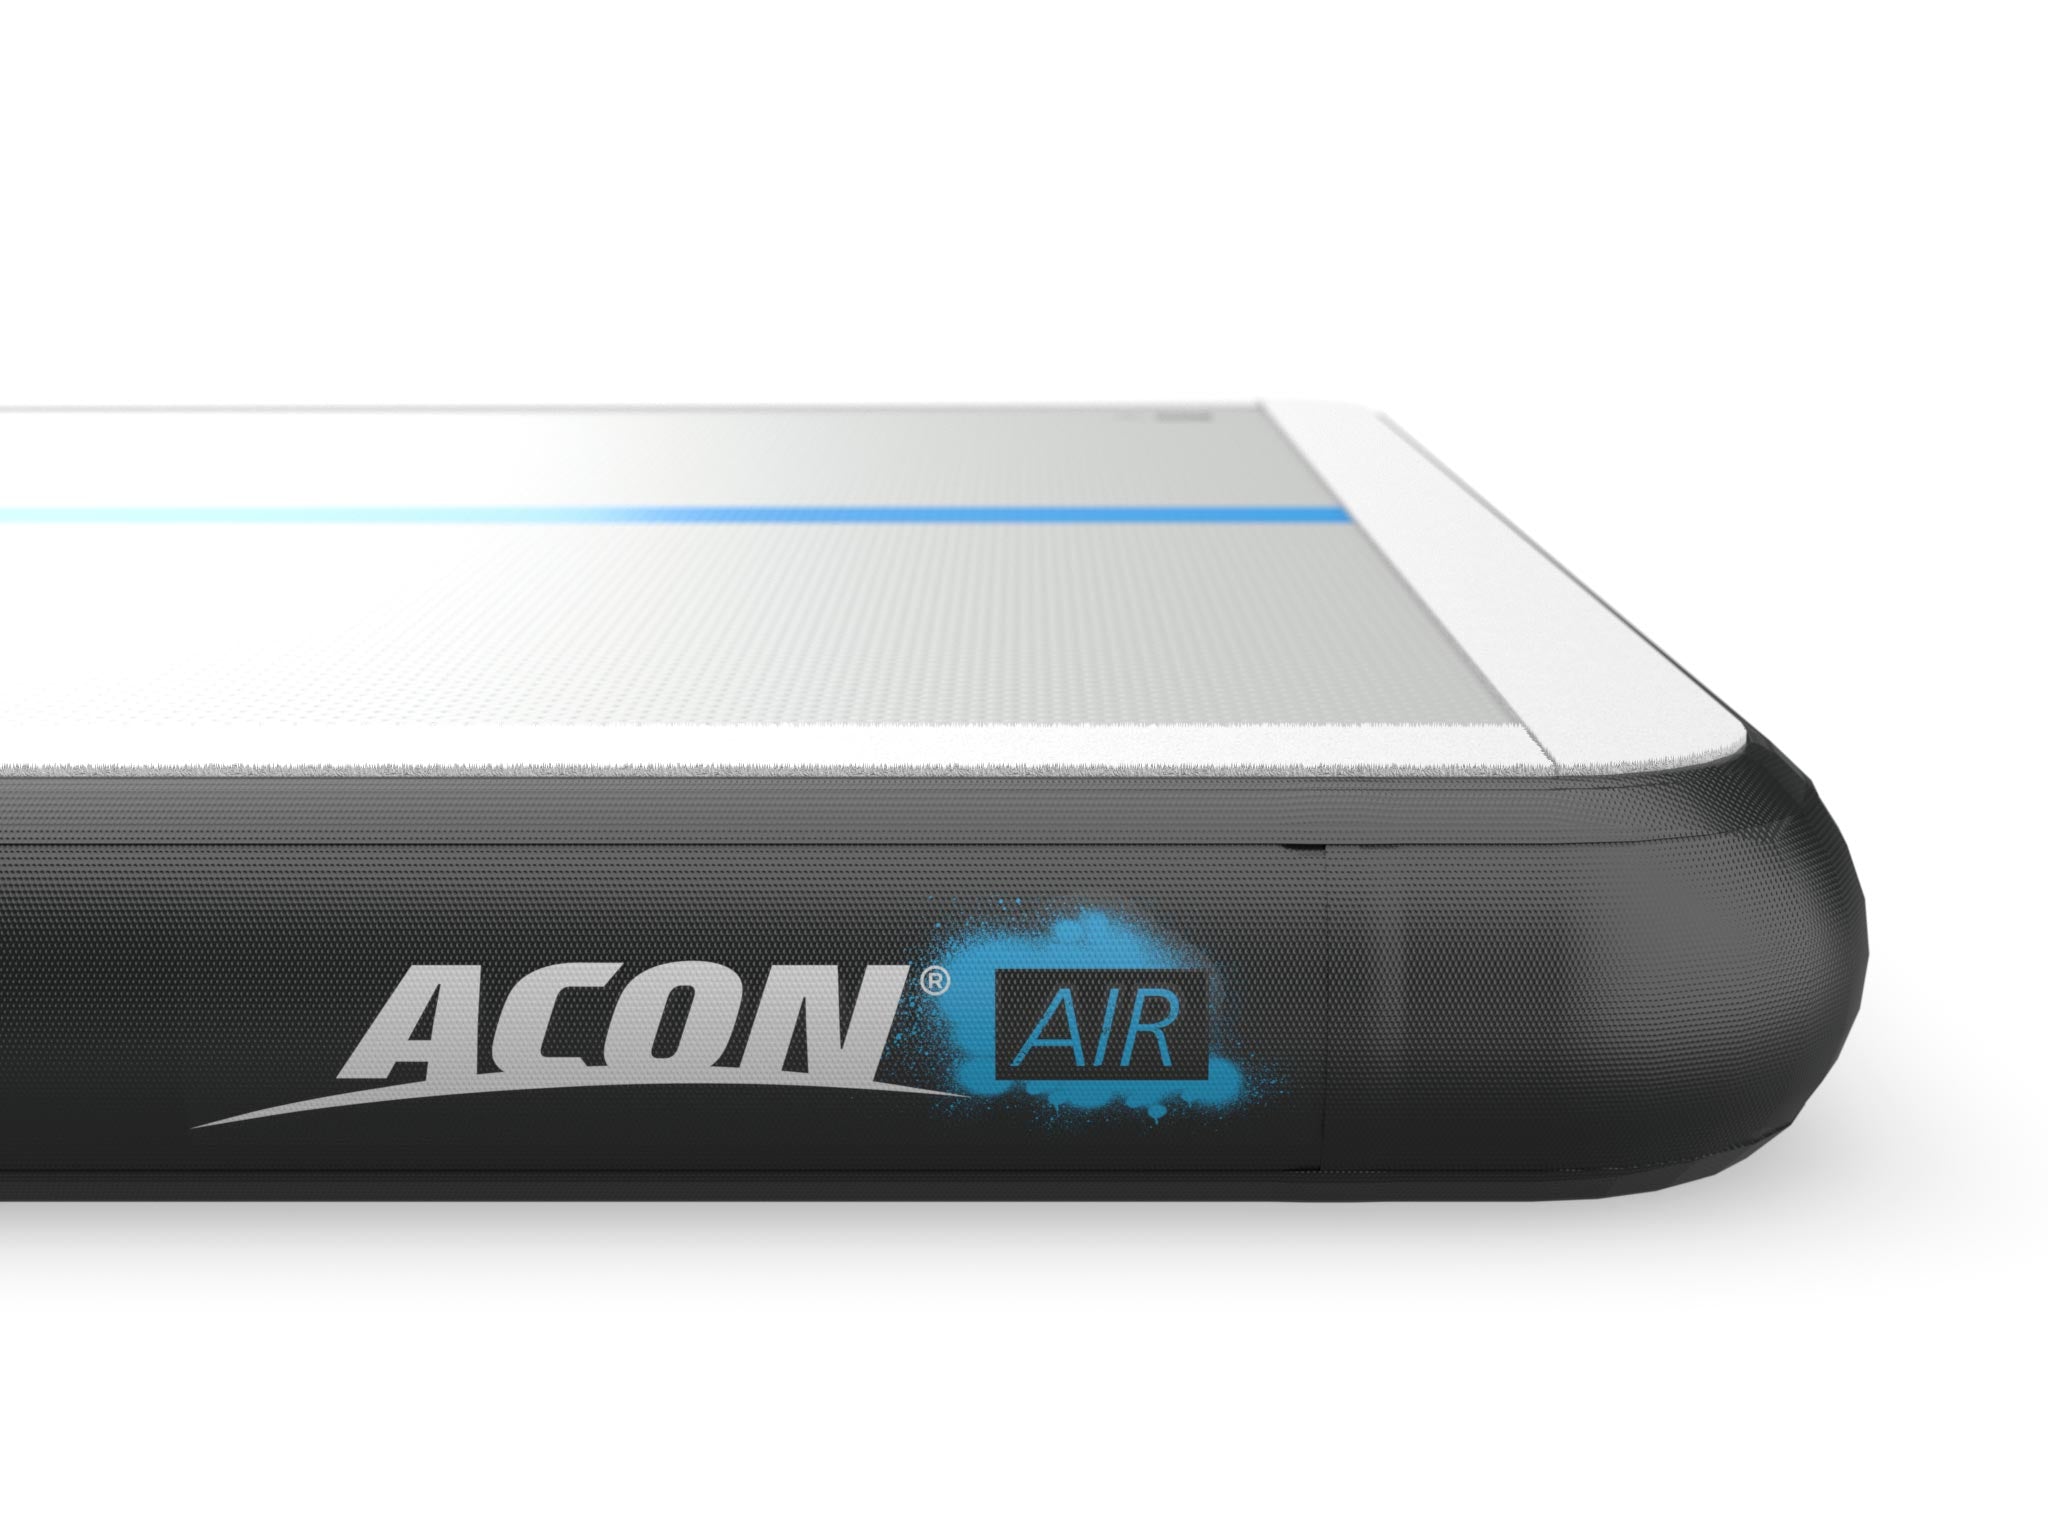 ACON Big AirTrack 39ft - details layers